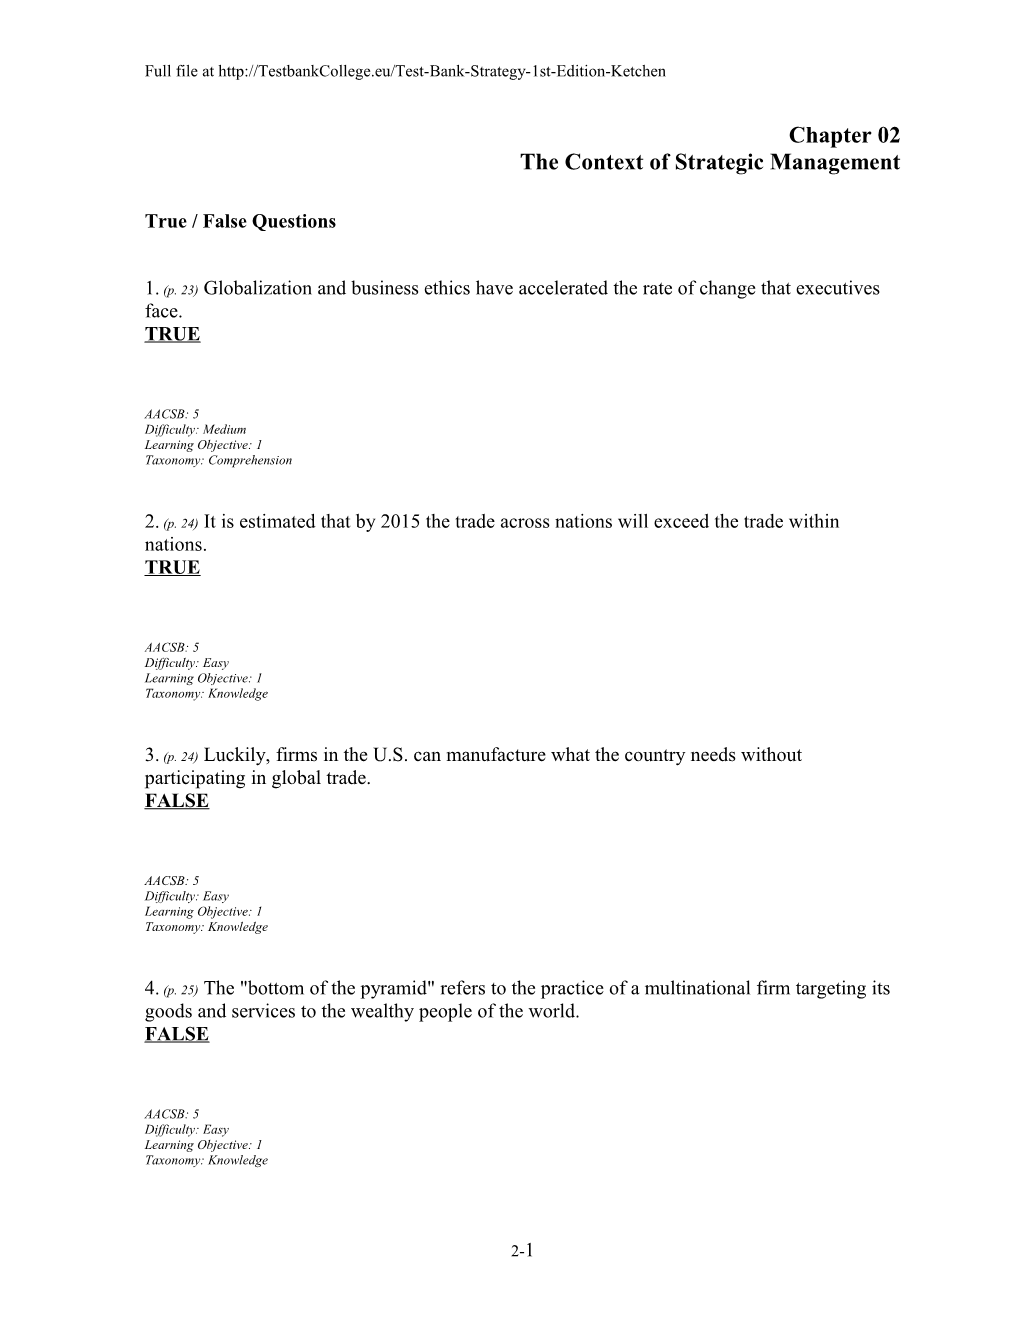 Chapter 02 the Context of Strategic Management